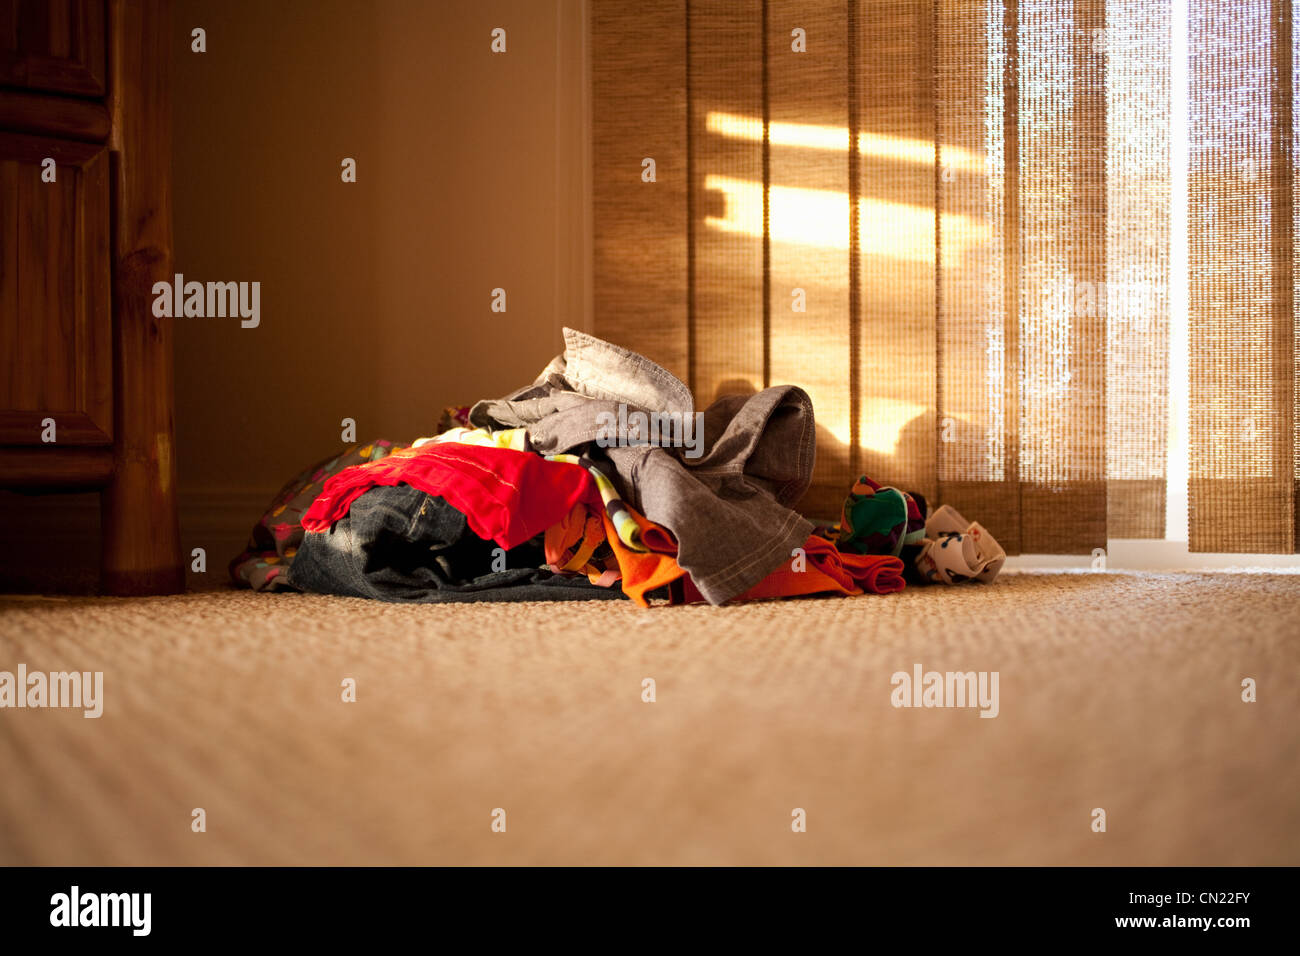 Pile of clothes on floor Stock Photo